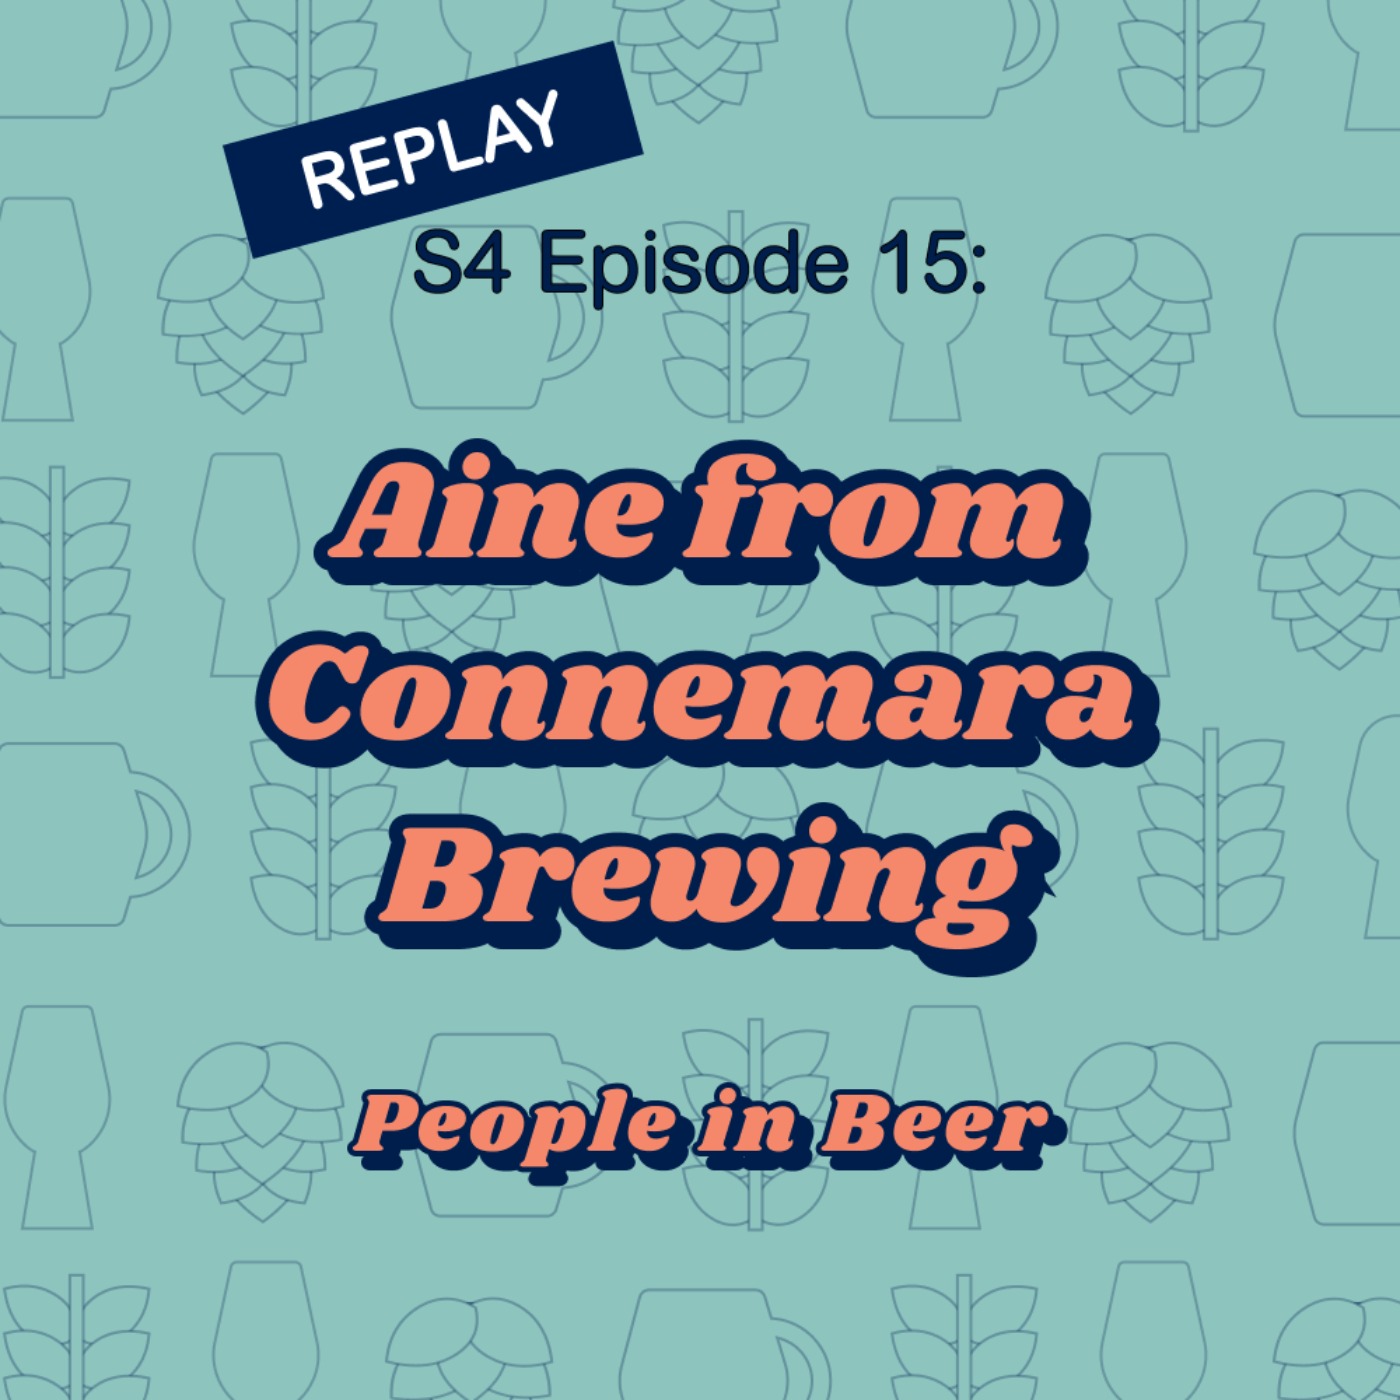 Aine from Connemara Brewing (replay)